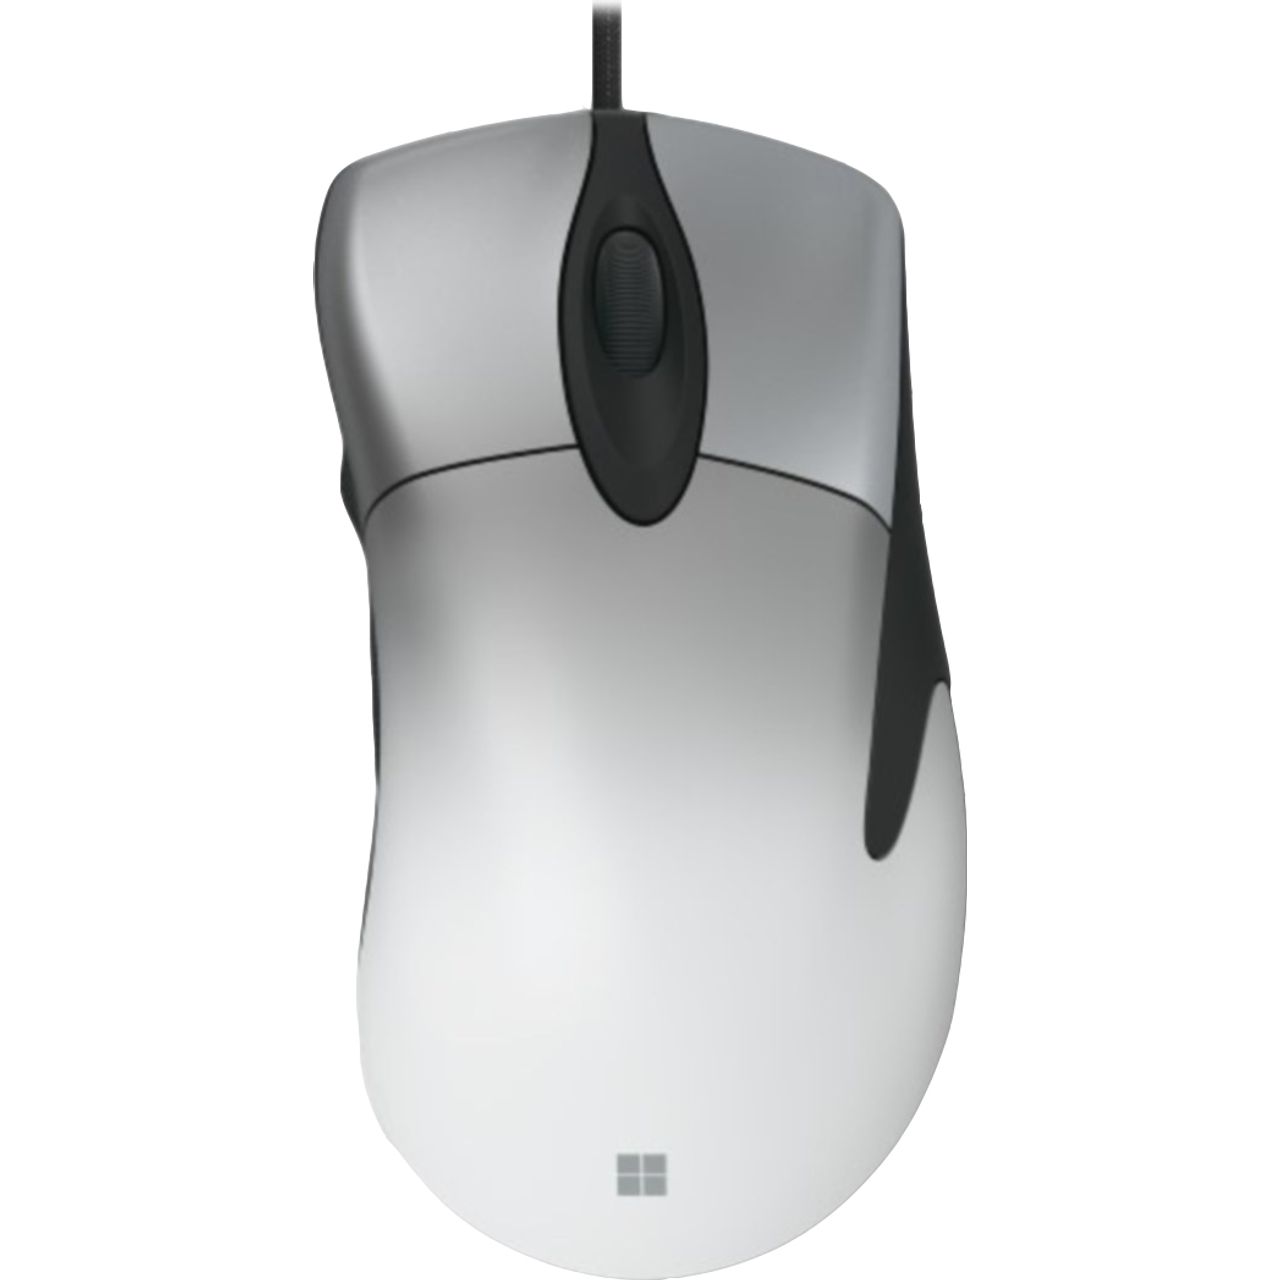 Microsoft Intellimouse Pro Mouse Review